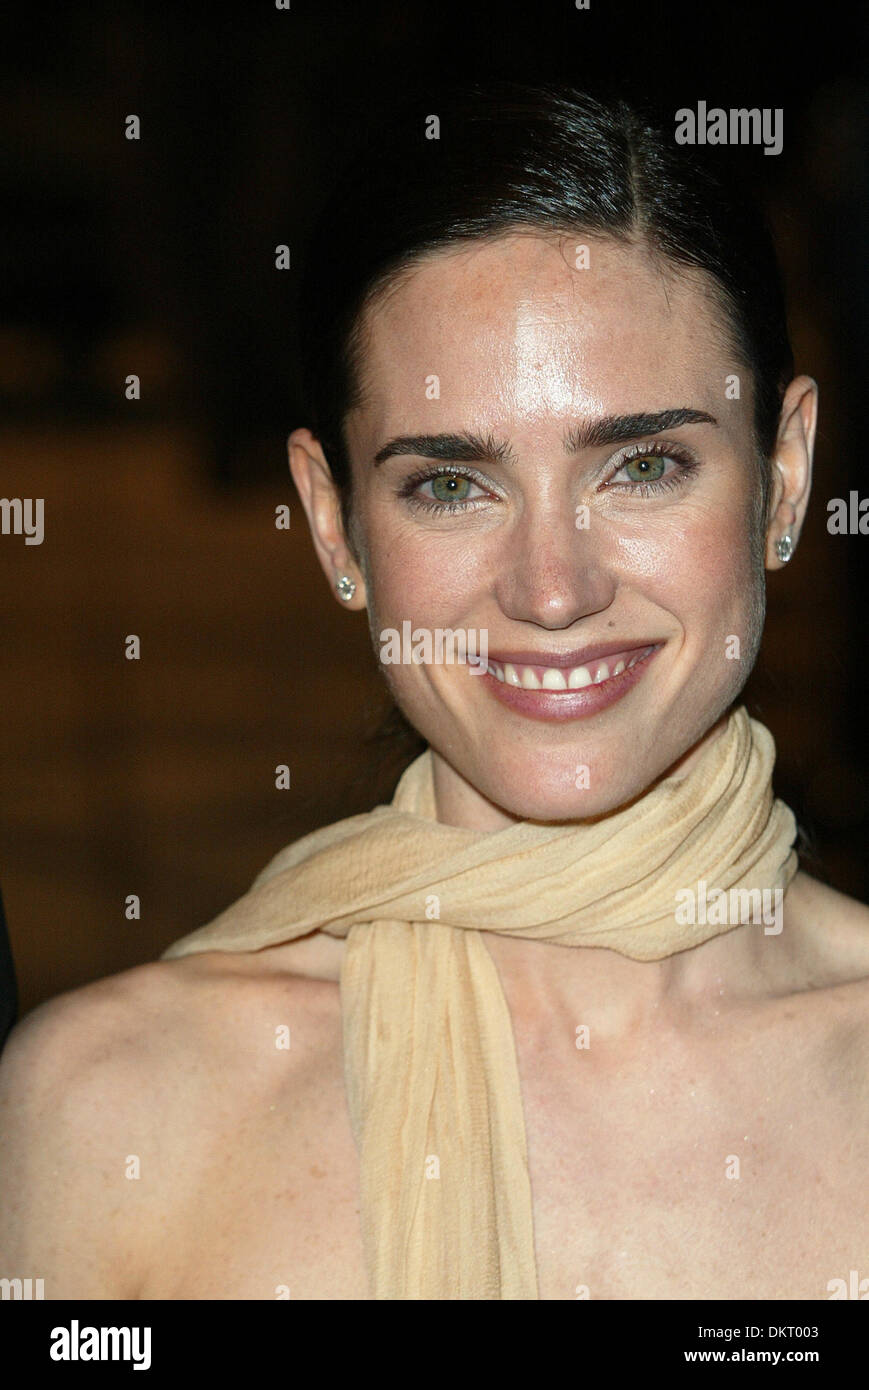 JENNIFER CONNELLY.attrice.A.BEVERLY HILLS LOS ANGELES, US.24/03/2002.LA1886 Foto Stock